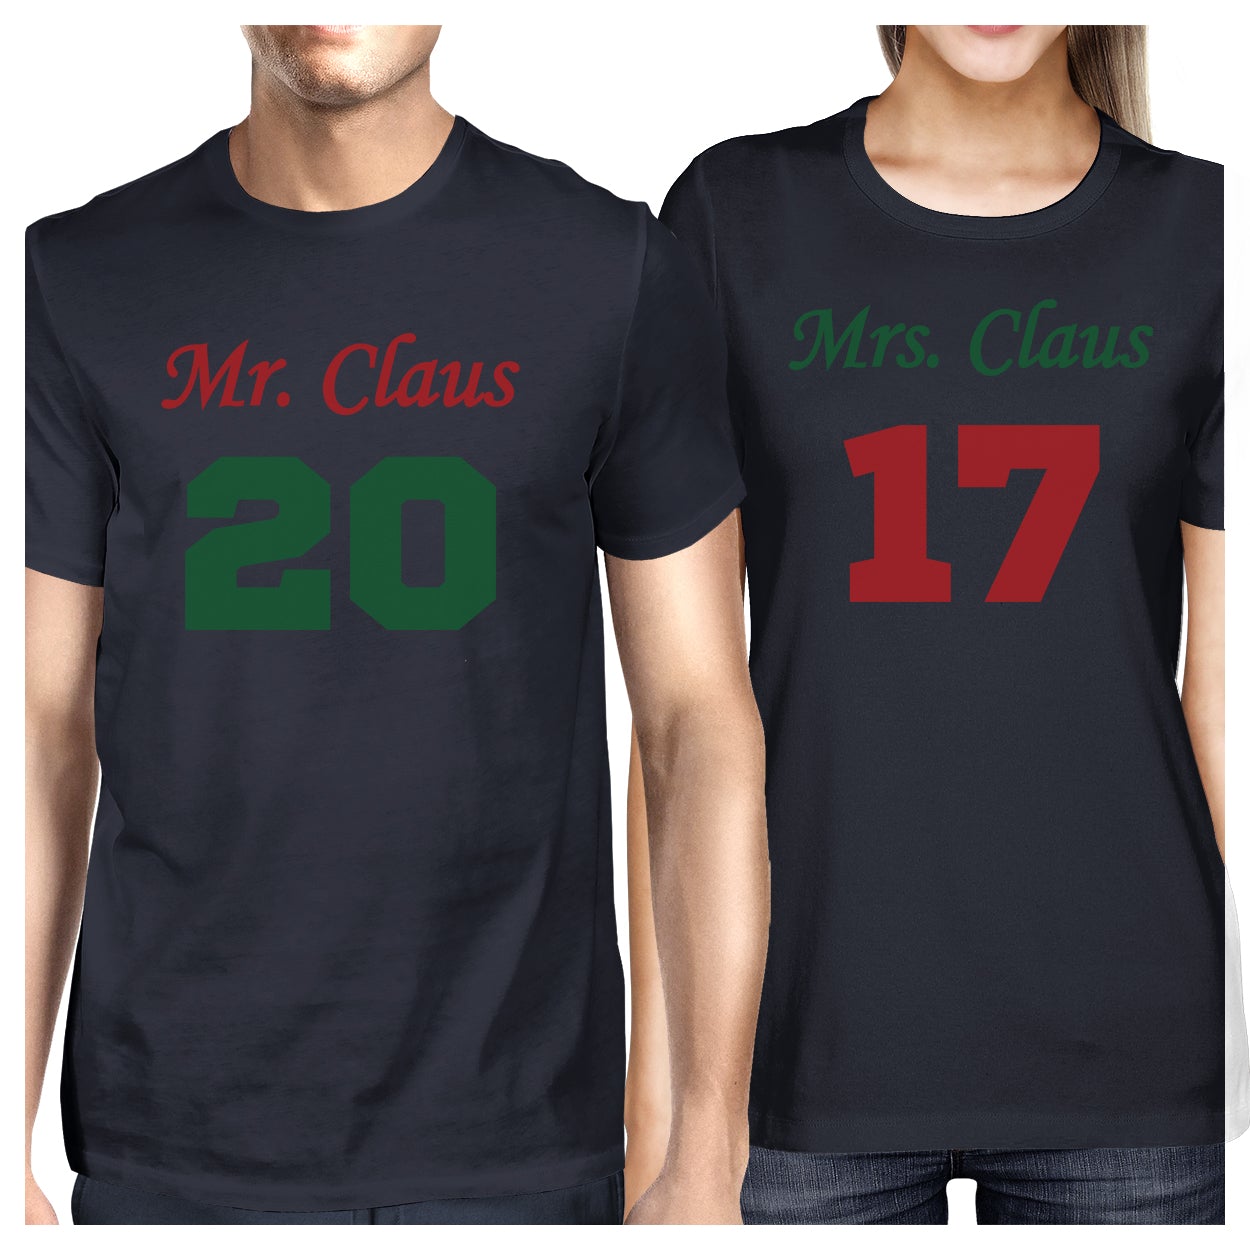 Mr. And Mrs. Claus Matching Couple Navy Shirts